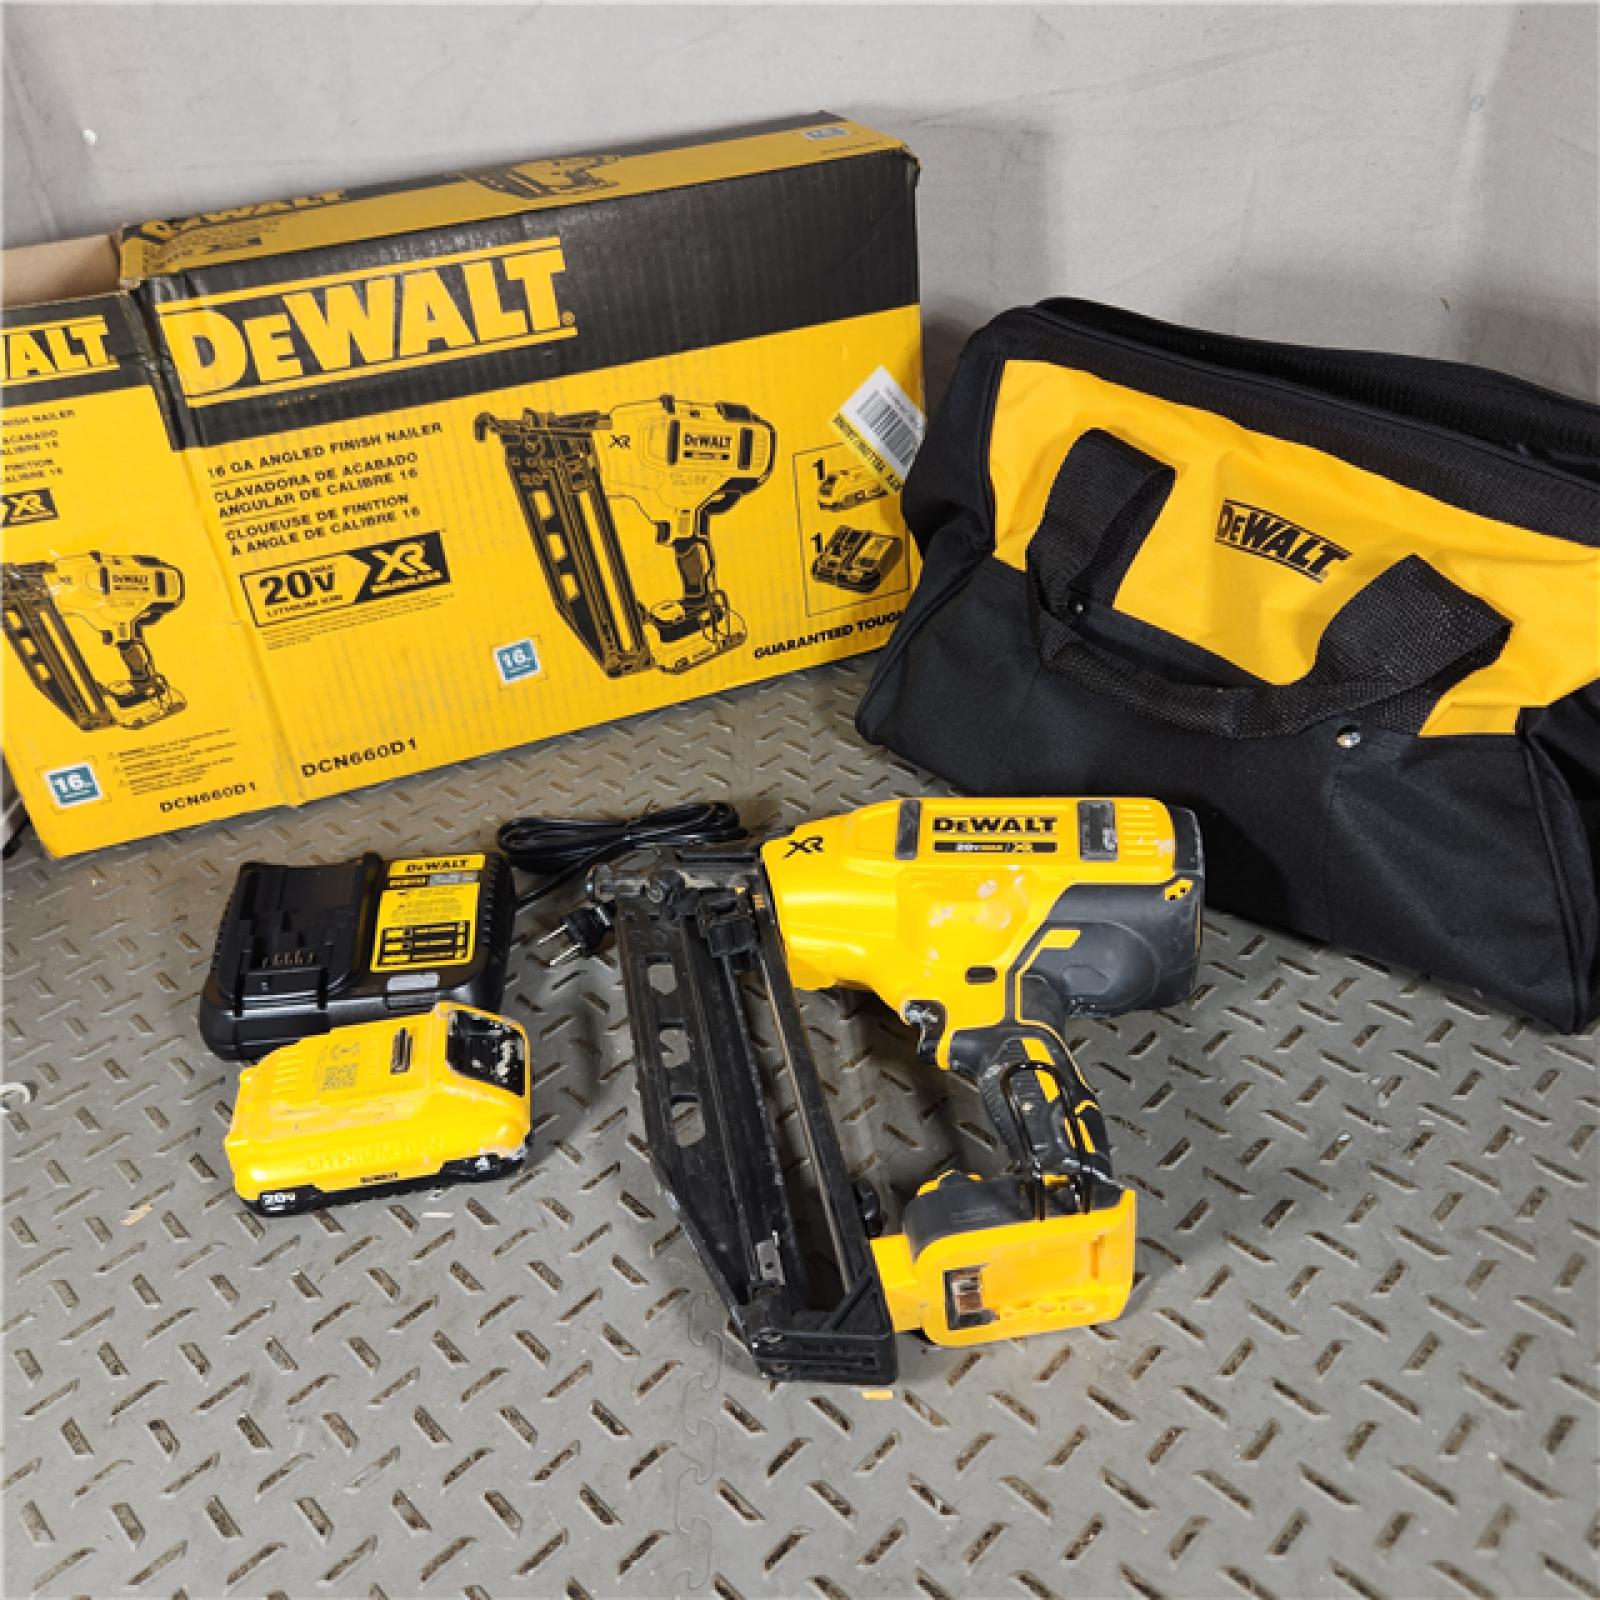 Houston Location - AS-IS DeWalt DCN660D1 20V 16 Gauge Cordless Angled Finish Nailer Kit W/ 2Ah Battery - Appears IN LIKE NEW Condition